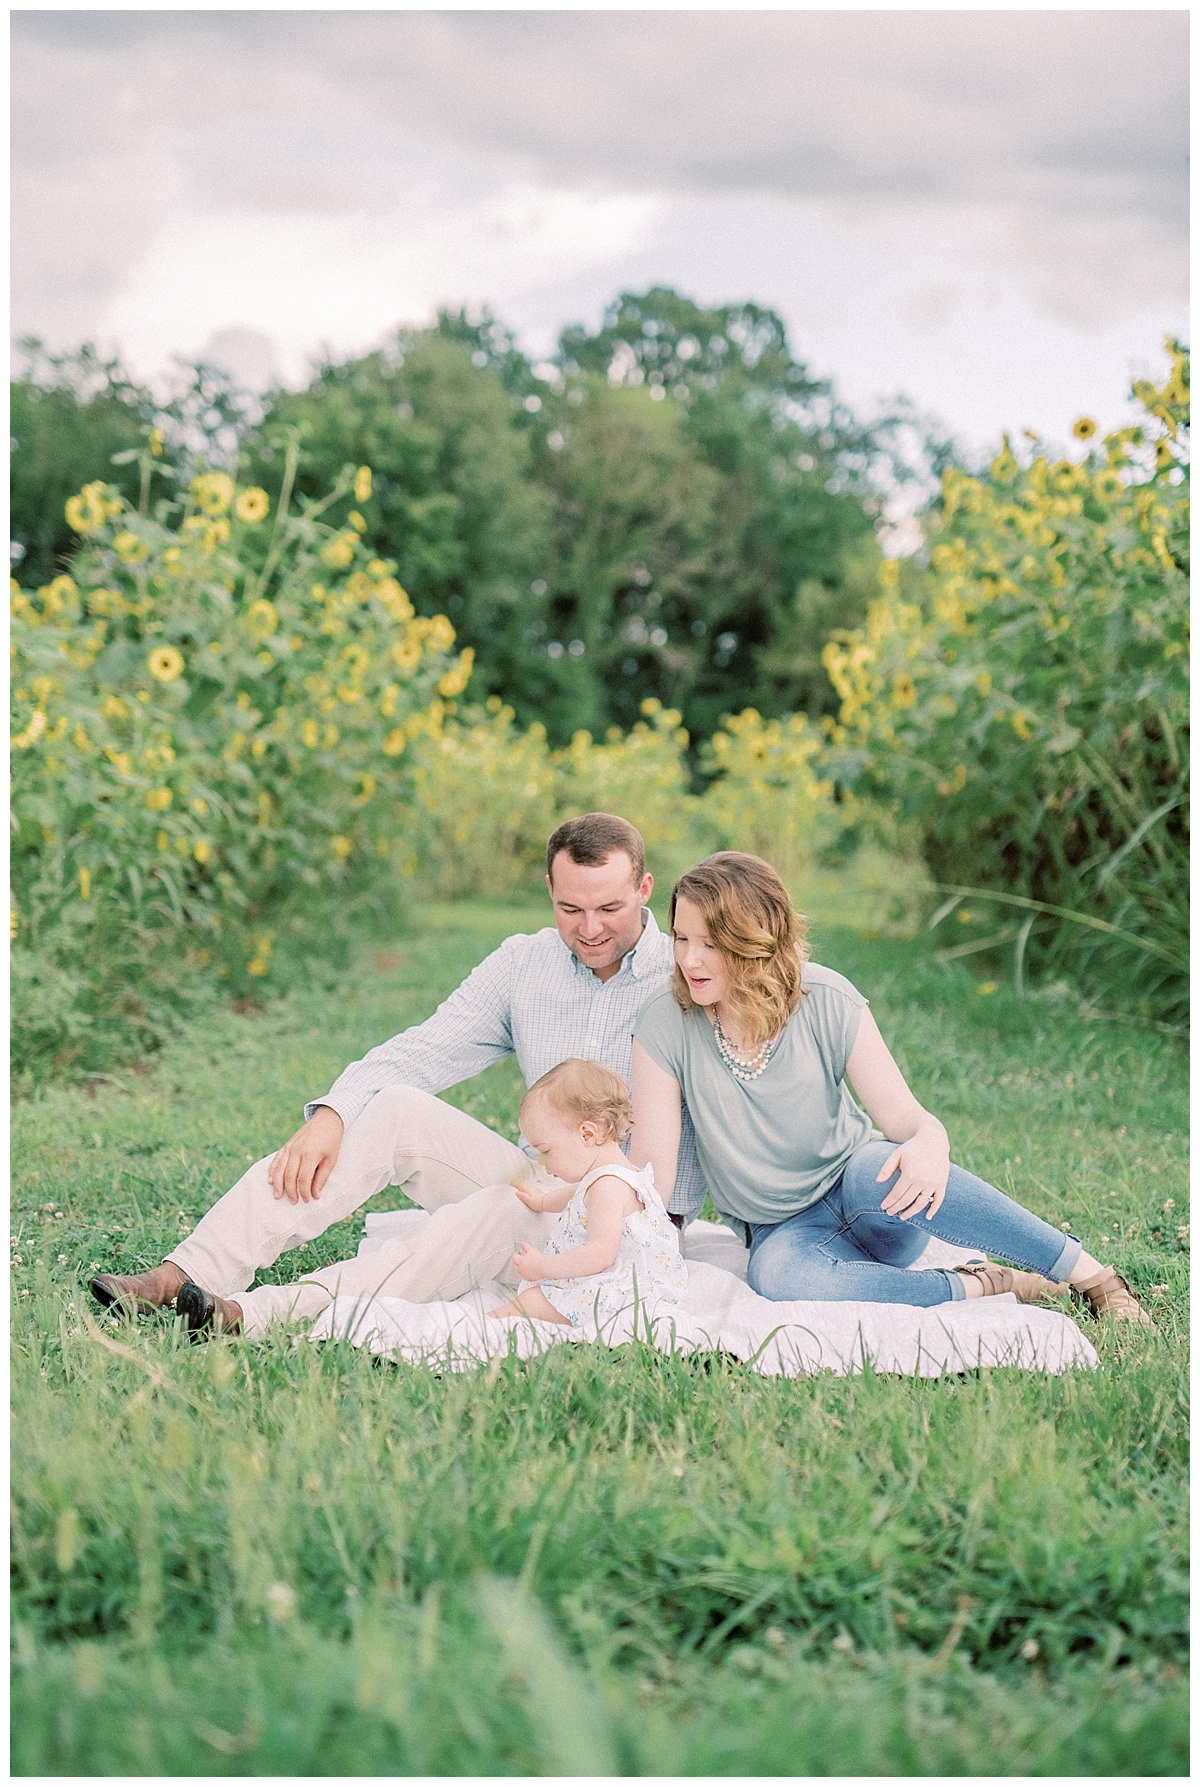 Outdoor Family Photography in Murfreesboro Tn by Film Photographer Grace Paul.